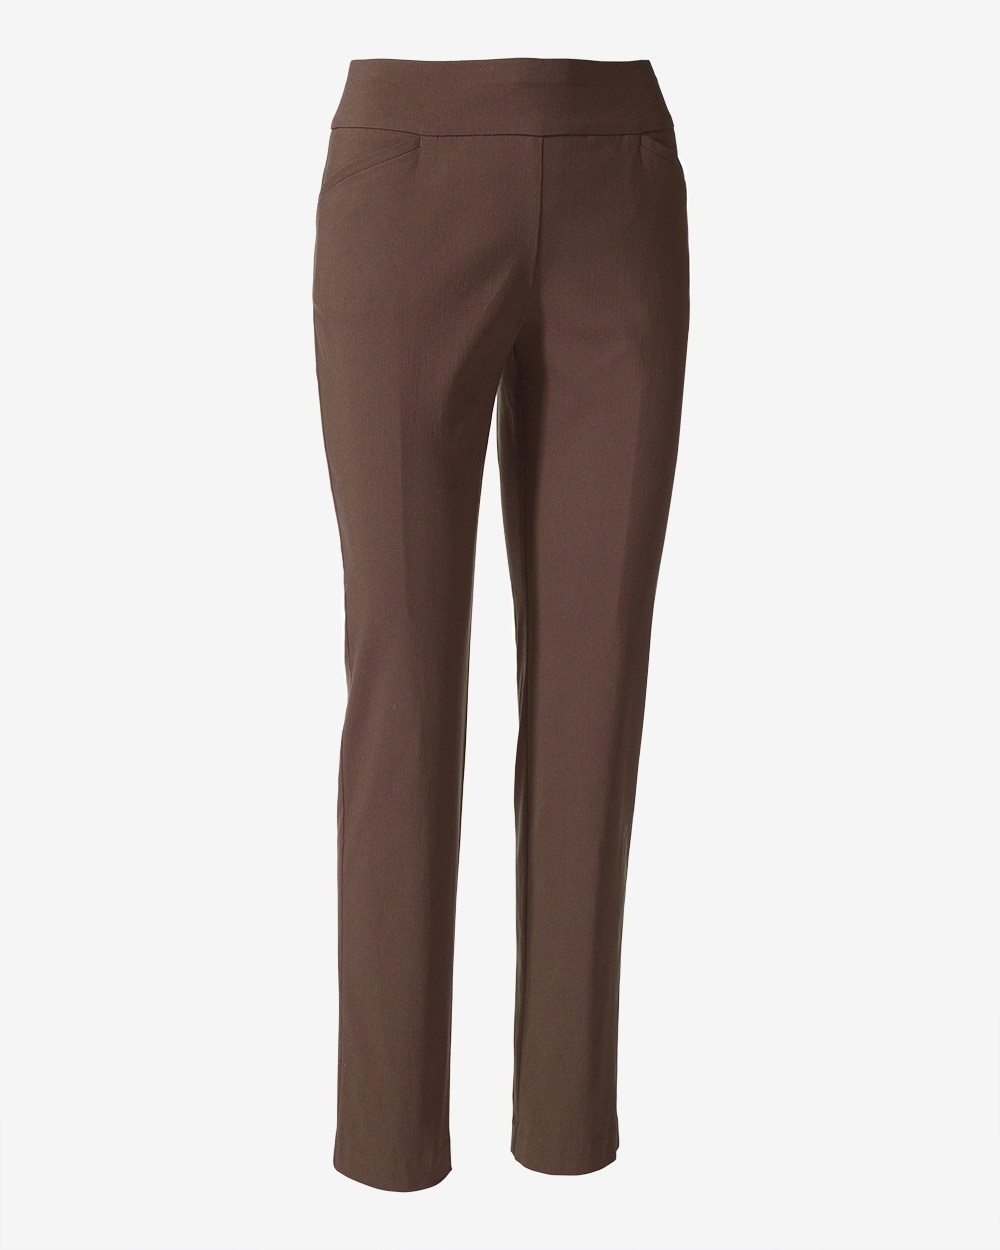 Perfect Stretch Fabulously Slimming Pants - Chico's Off The Rack